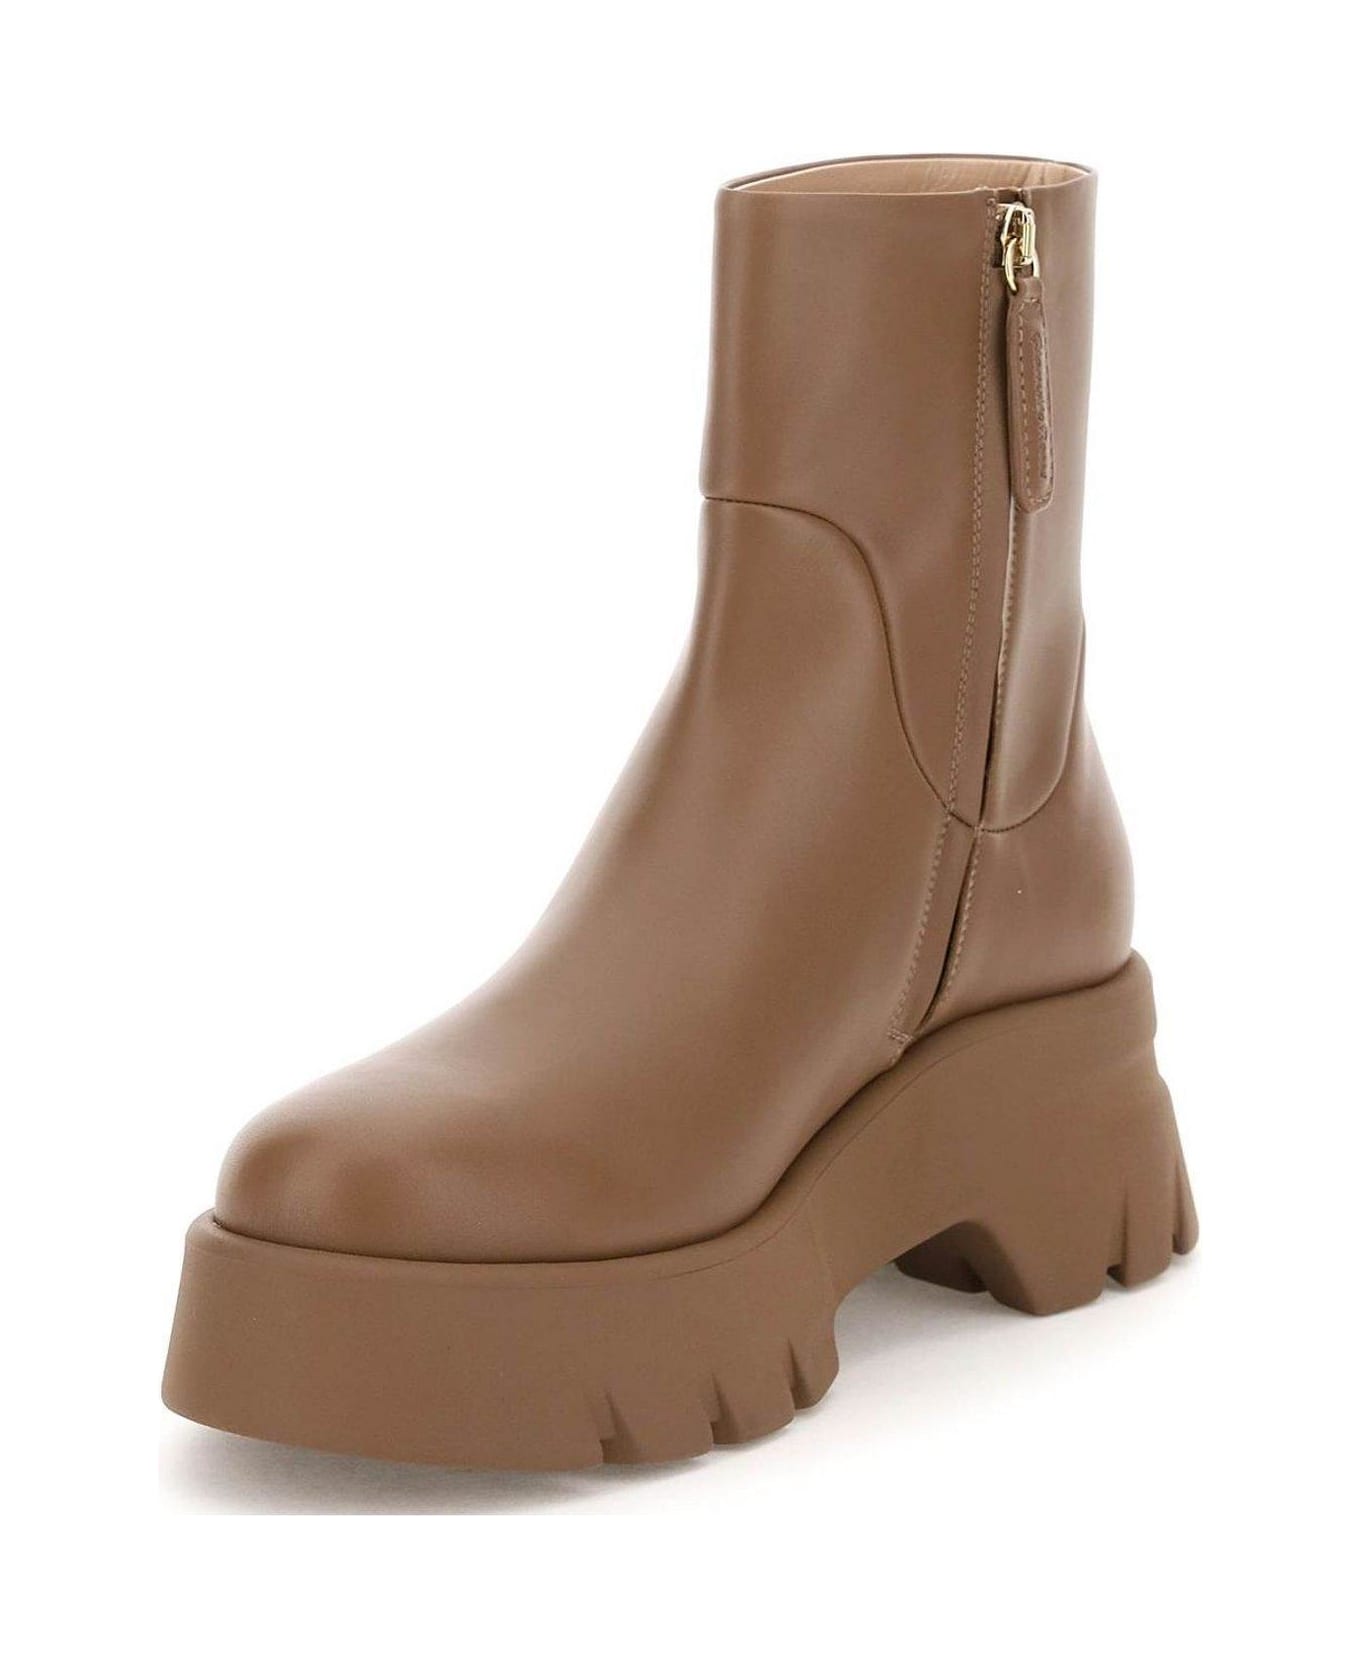 Gianvito Rossi Zip-up High-ankle Boots - Brown ブーツ